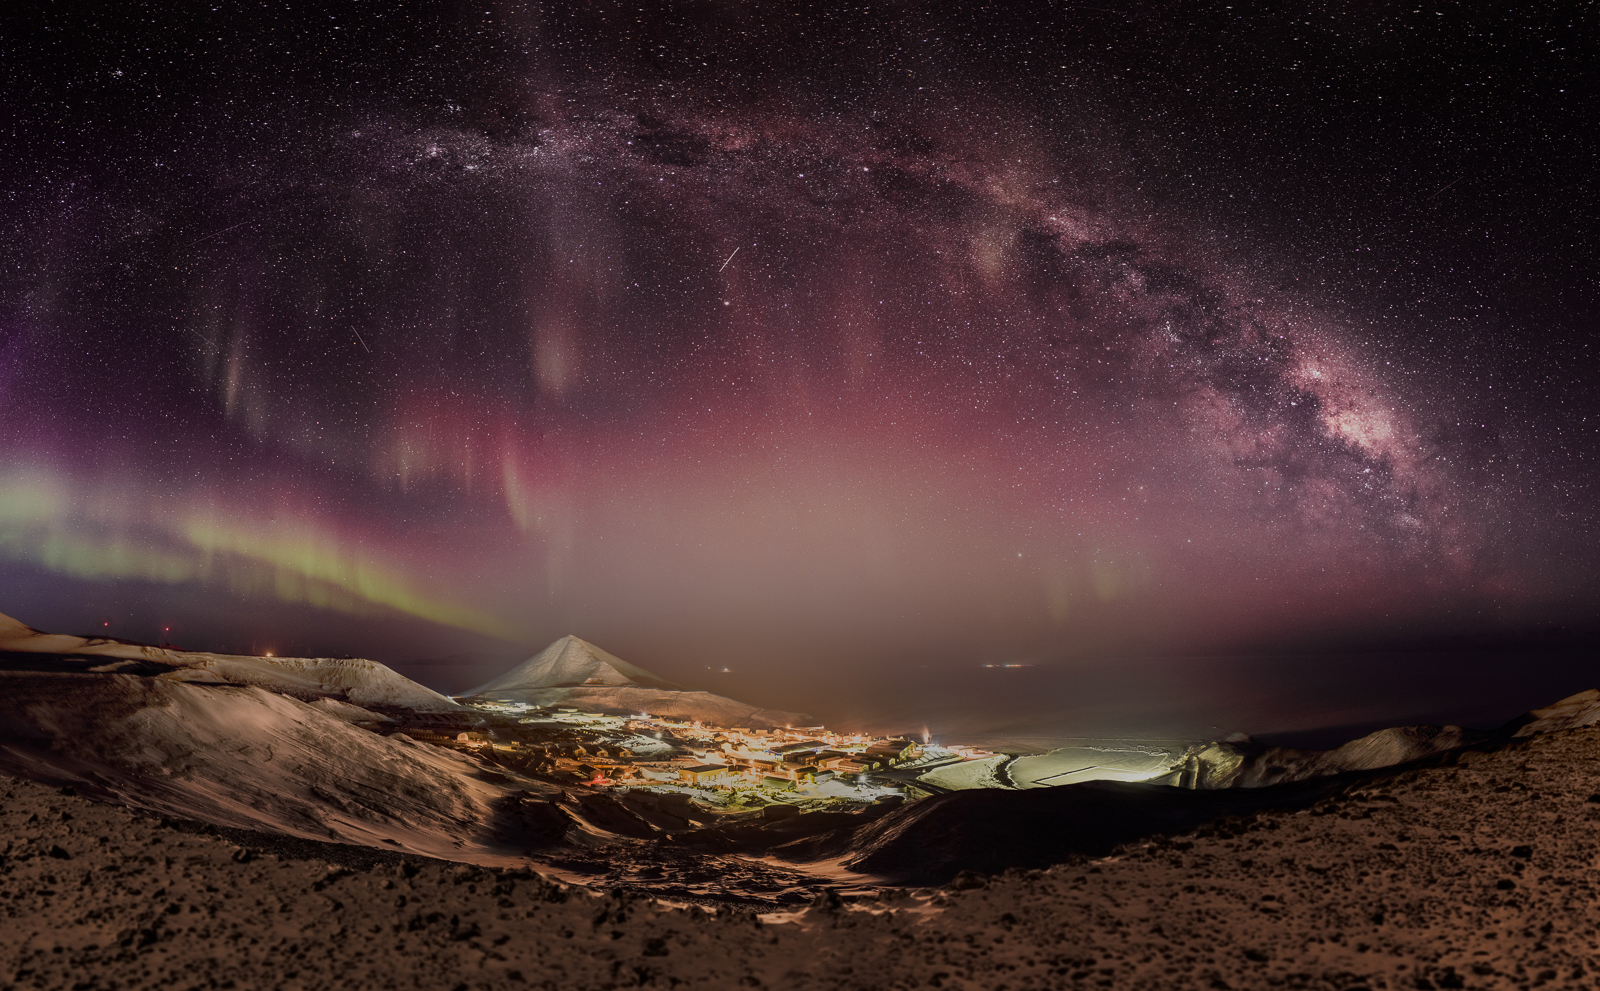 A view of a town at night with auroras.